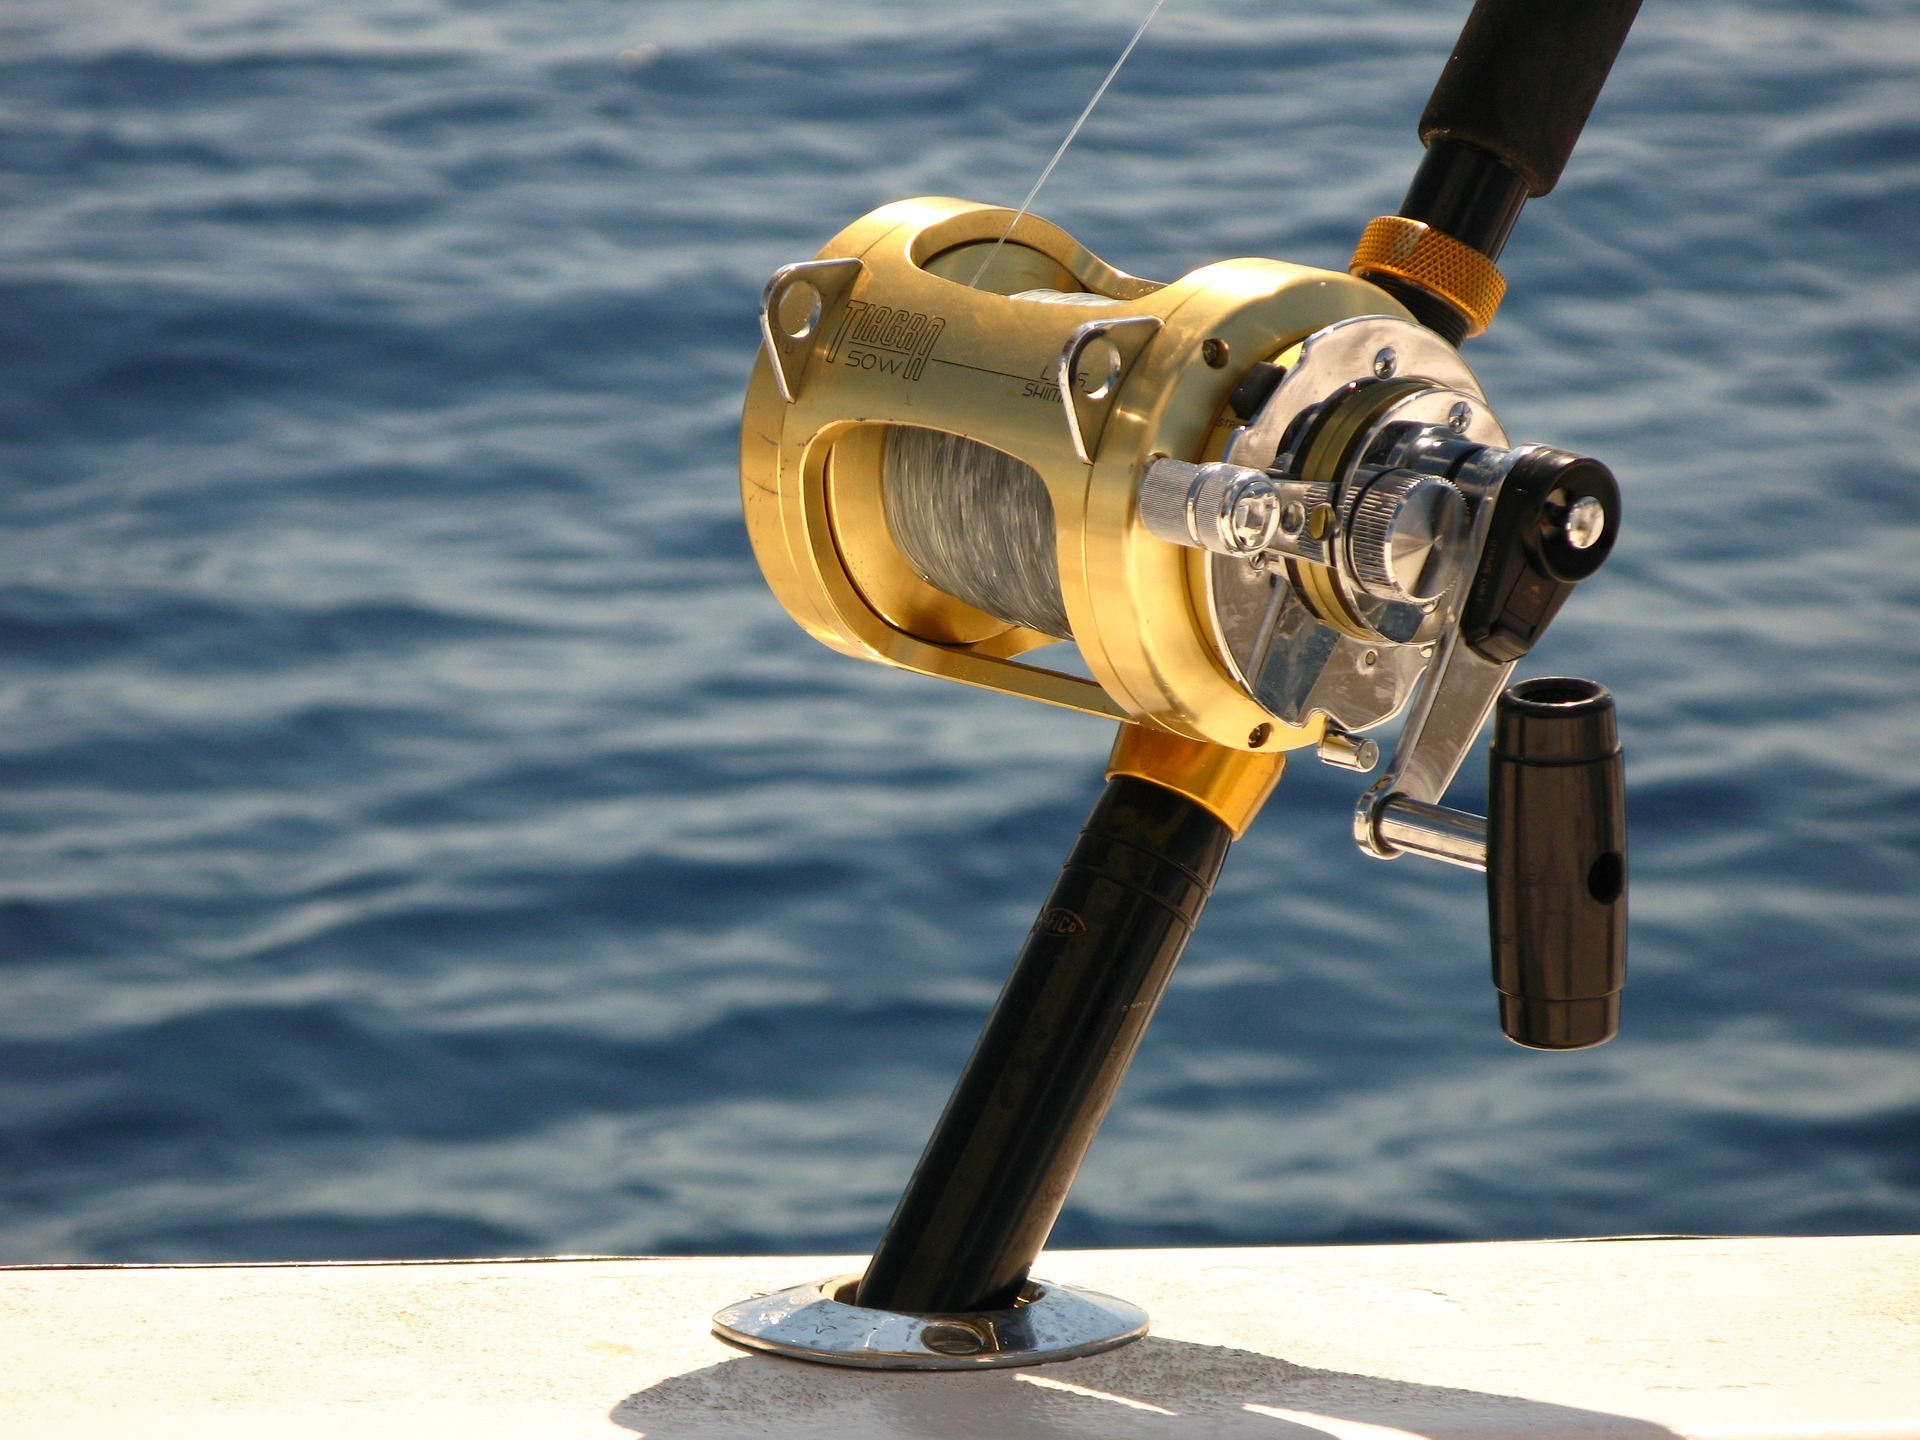 baitcaster or spinning reel for deep sea fishing